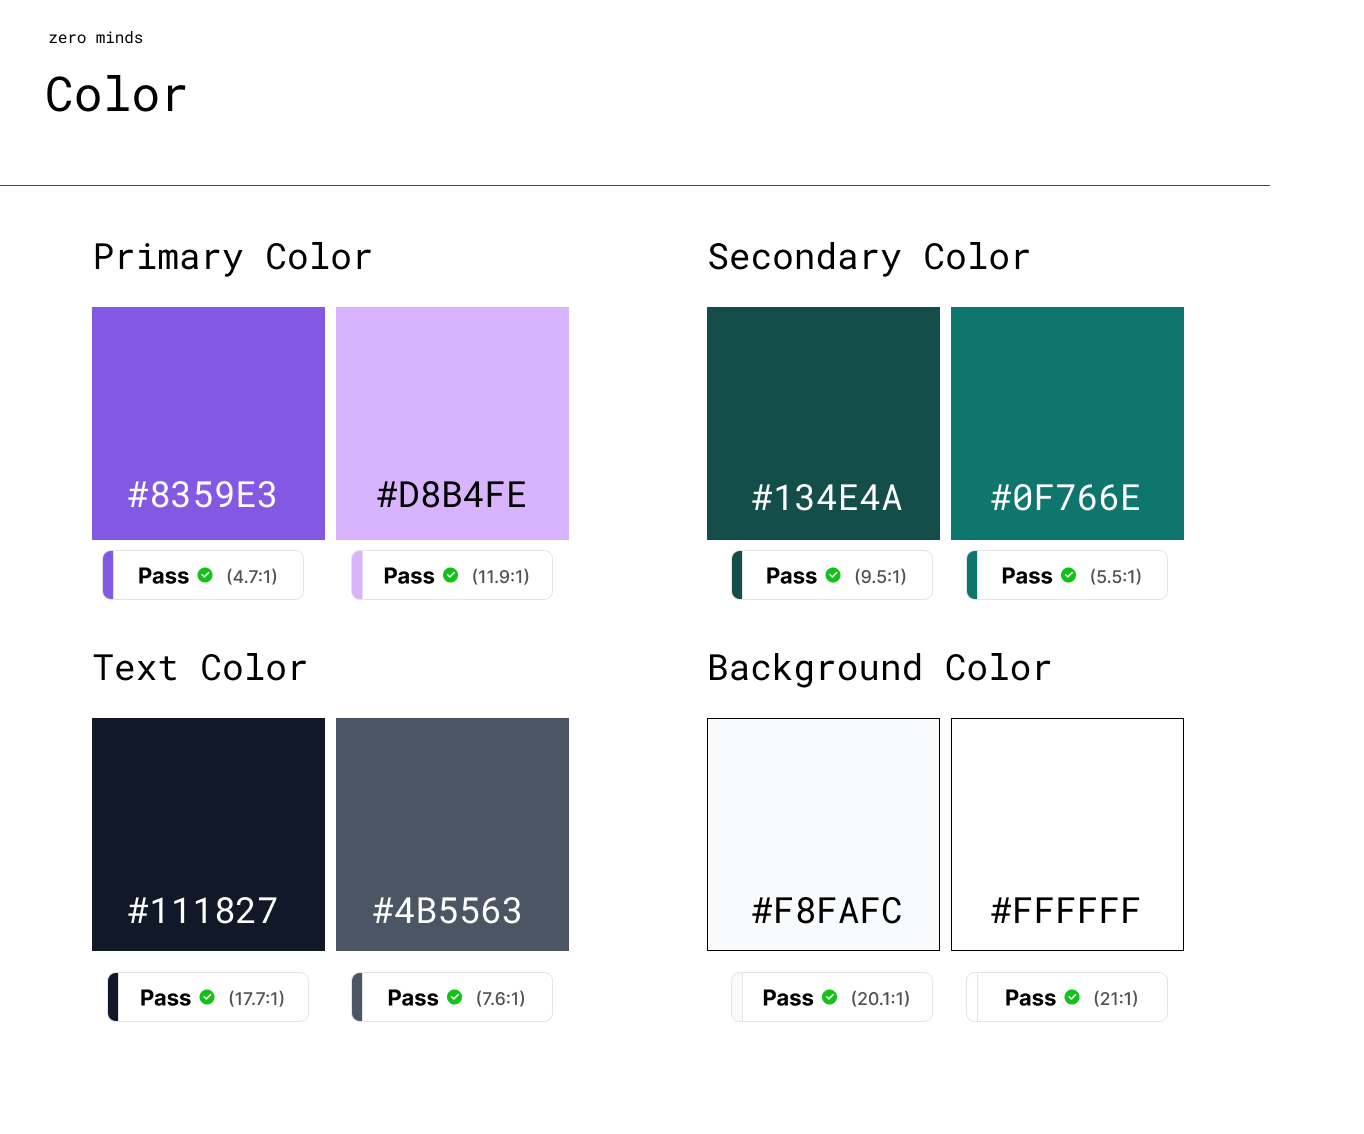 Color Palette created in Figma showing Primary Color Purple and a lighter shade, secondary color Teal and a lighter shade as well as text color in dark gray and background colors in off-white.